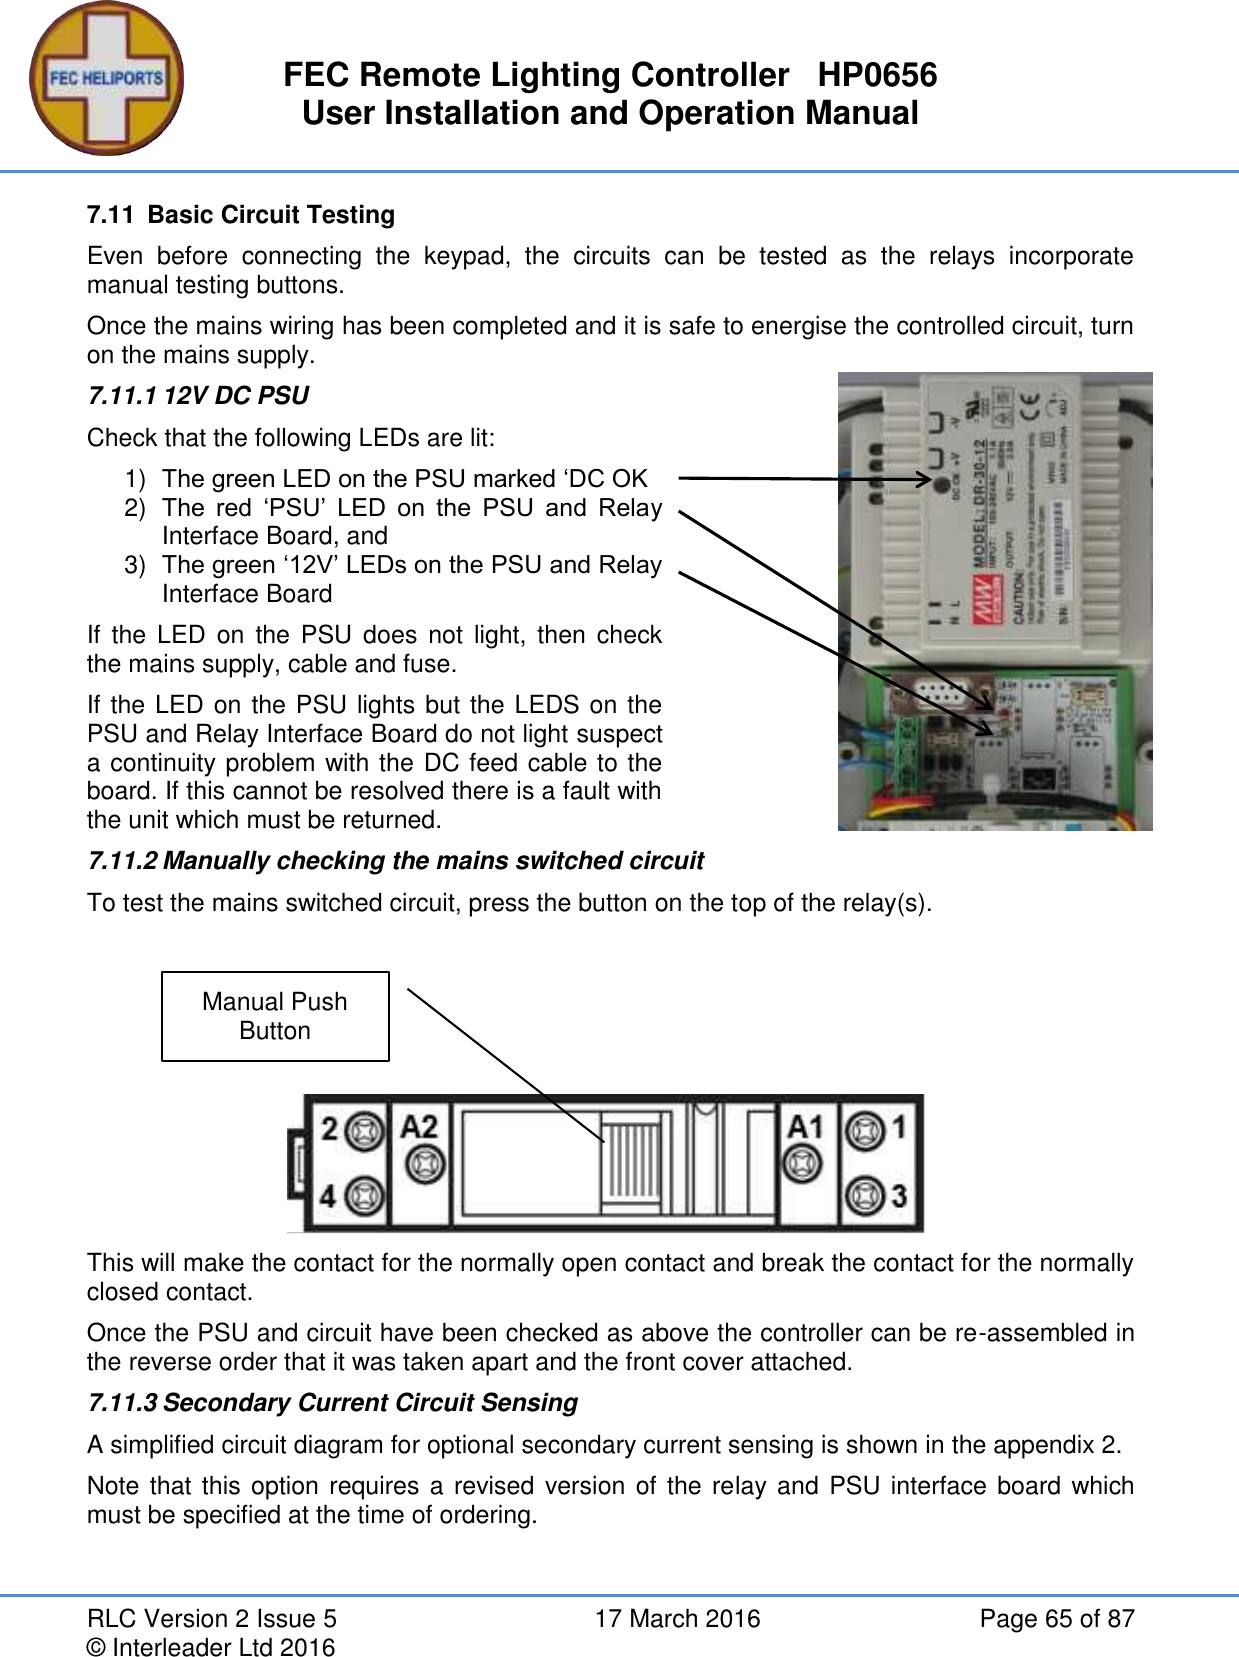 FEC Remote Lighting Controller   HP0656 User Installation and Operation Manual RLC Version 2 Issue 5  17 March 2016  Page 65 of 87 © Interleader Ltd 2016 7.11  Basic Circuit Testing Even  before  connecting  the  keypad,  the  circuits  can  be  tested  as  the  relays  incorporate manual testing buttons. Once the mains wiring has been completed and it is safe to energise the controlled circuit, turn on the mains supply. 7.11.1 12V DC PSU Check that the following LEDs are lit: 1) The green LED on the PSU marked ‘DC OK 2) The  red  ‘PSU’  LED  on  the  PSU  and  Relay Interface Board, and 3) The green ‘12V’ LEDs on the PSU and Relay Interface Board If  the  LED  on the  PSU  does  not  light,  then  check the mains supply, cable and fuse. If the LED on the PSU lights but the LEDS on the PSU and Relay Interface Board do not light suspect a continuity problem with the DC feed cable to the board. If this cannot be resolved there is a fault with the unit which must be returned.  7.11.2 Manually checking the mains switched circuit To test the mains switched circuit, press the button on the top of the relay(s).      This will make the contact for the normally open contact and break the contact for the normally closed contact. Once the PSU and circuit have been checked as above the controller can be re-assembled in the reverse order that it was taken apart and the front cover attached. 7.11.3 Secondary Current Circuit Sensing A simplified circuit diagram for optional secondary current sensing is shown in the appendix 2. Note that this option requires a revised version of the relay and PSU interface board which must be specified at the time of ordering.    Manual Push Button 